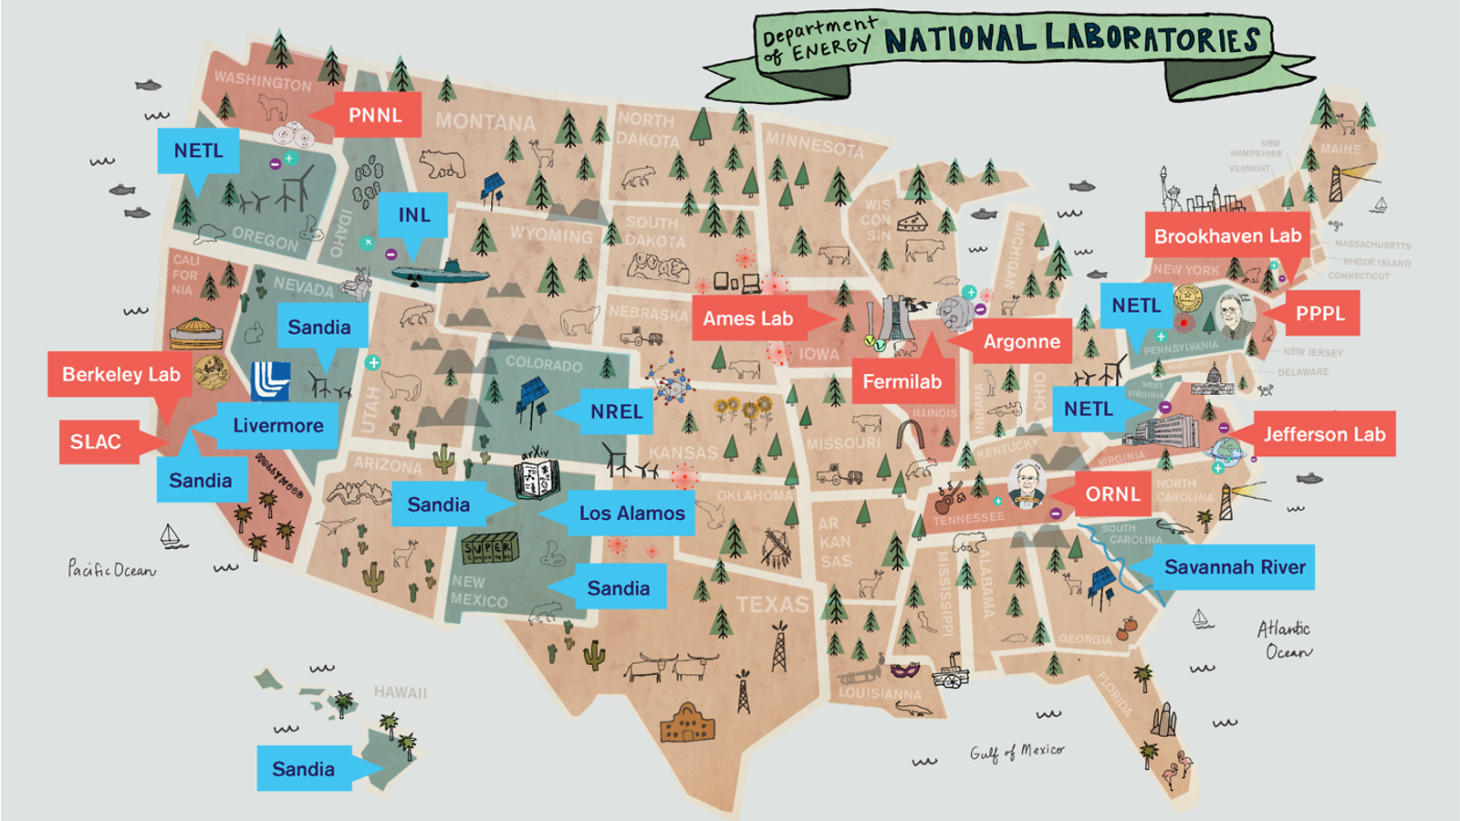 Illustrated map of the continental United States with tabs pointing to Department of Energy Labs.